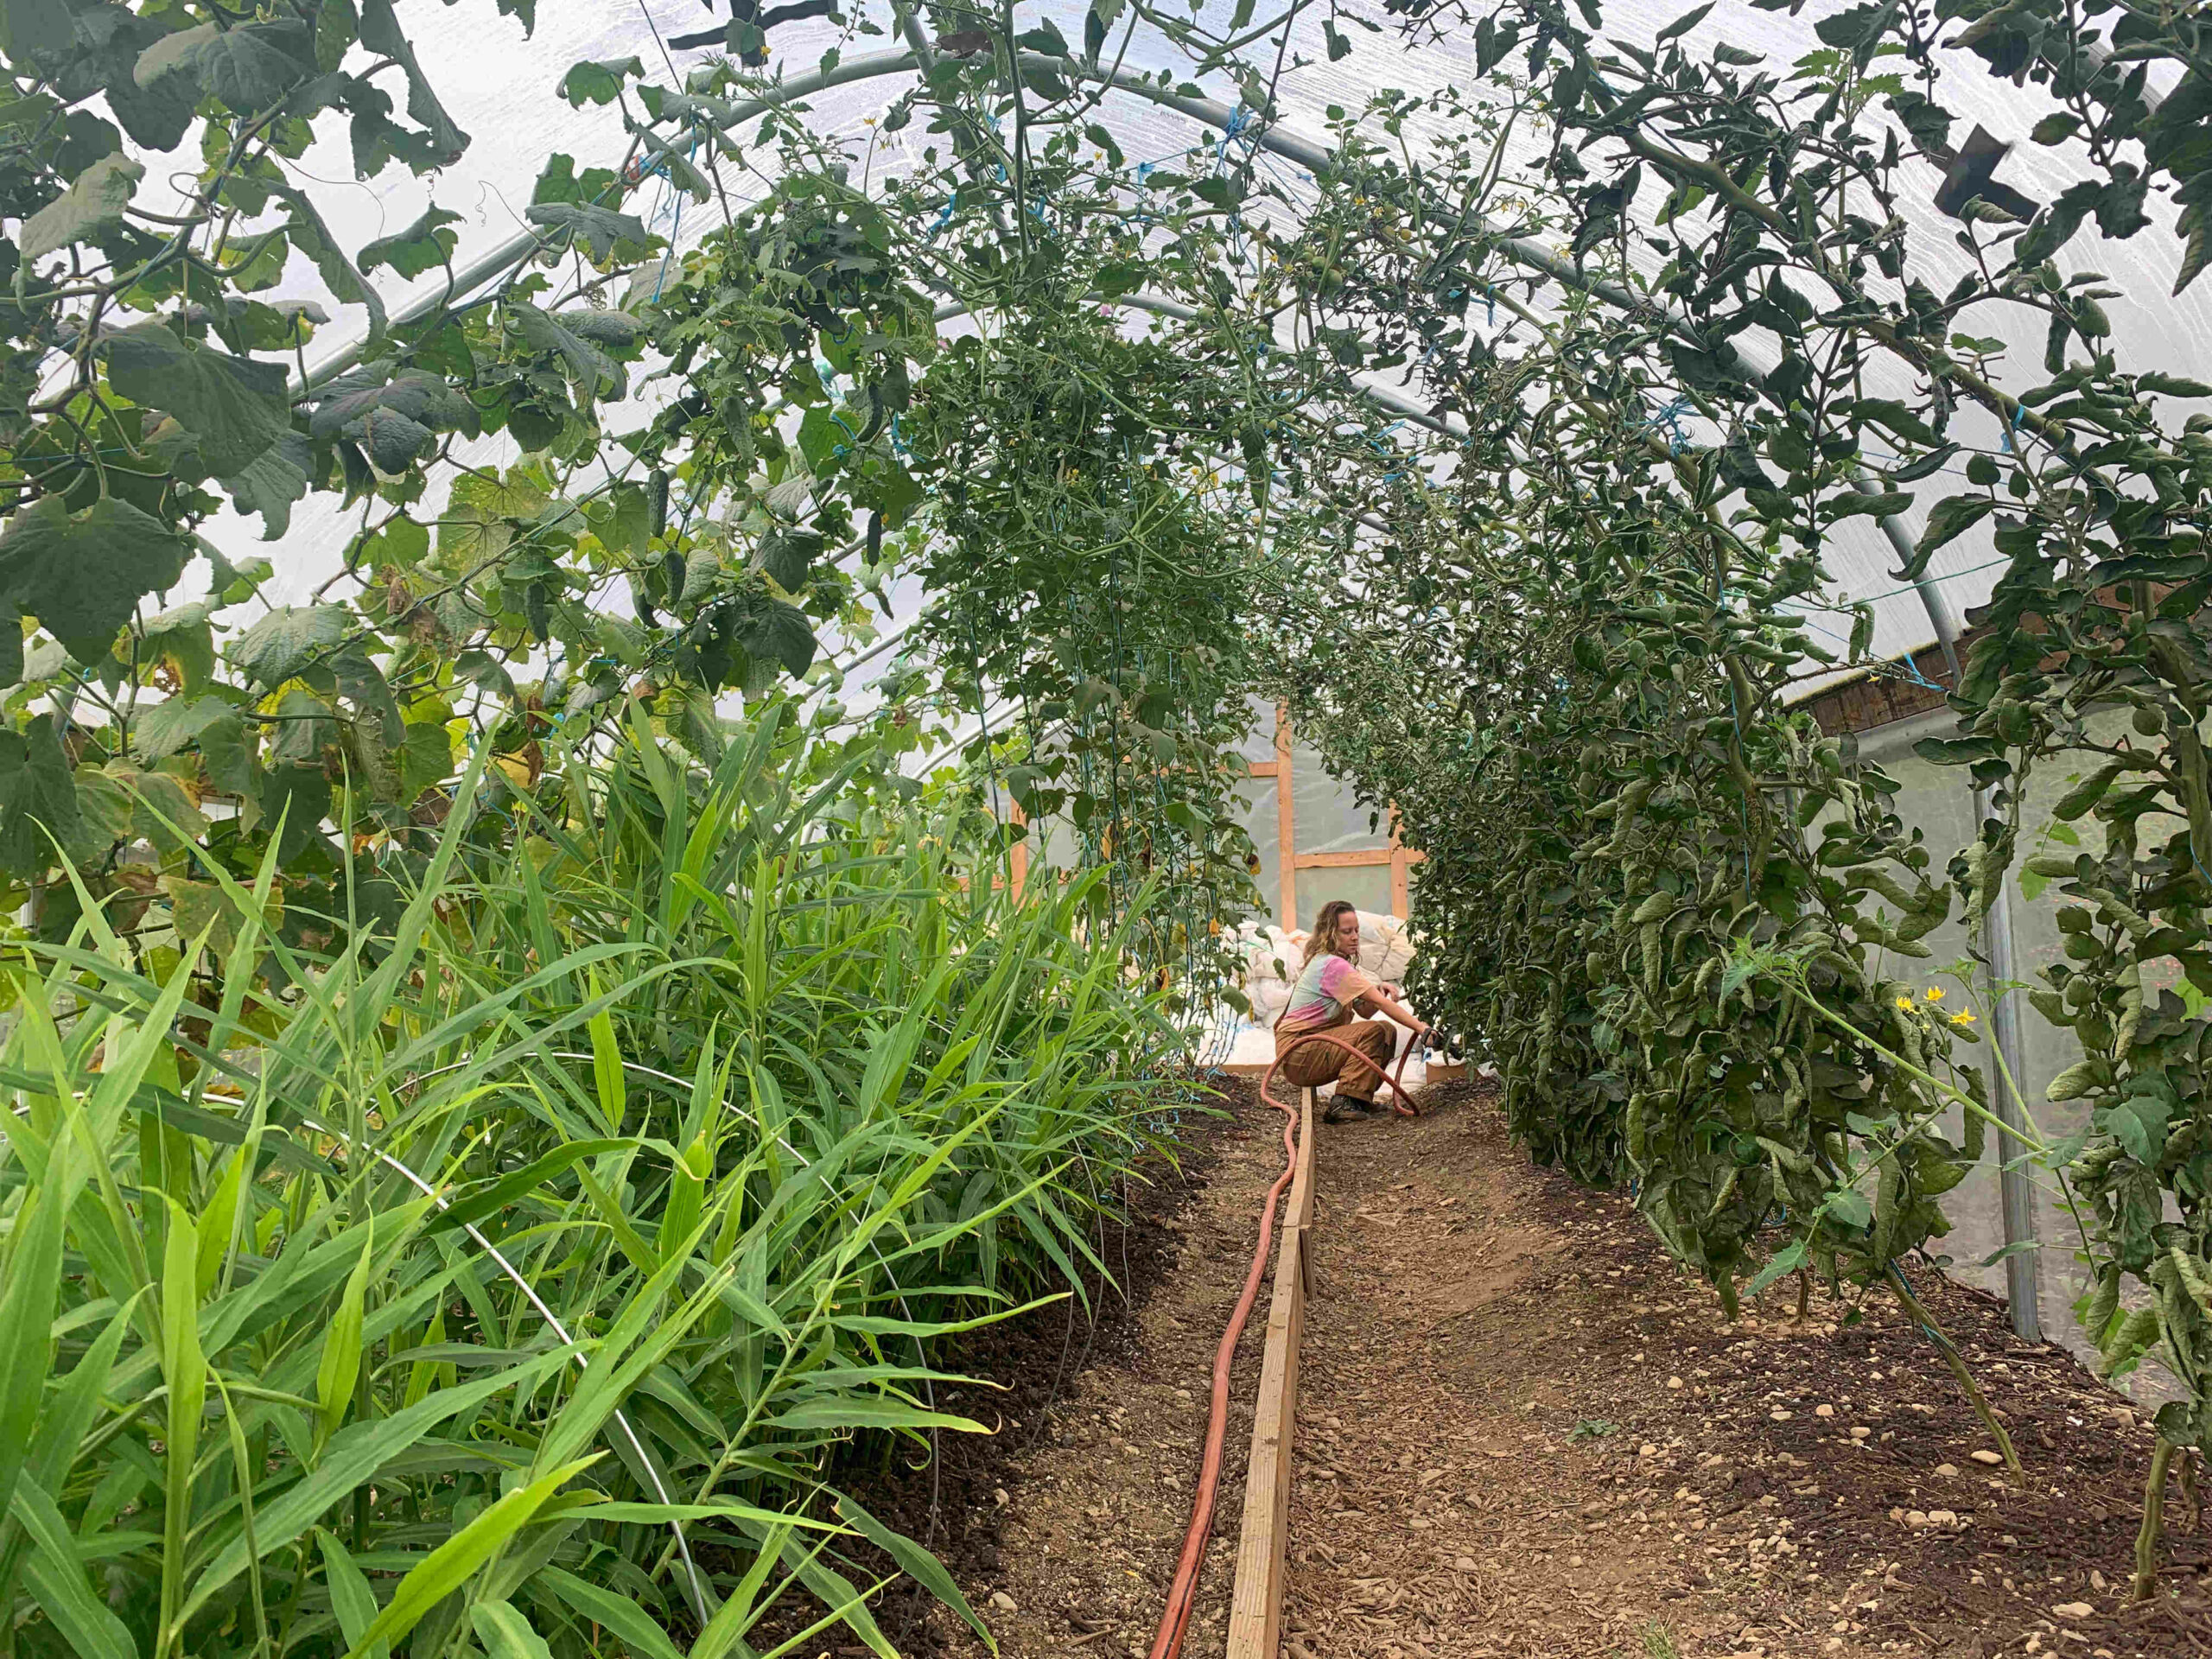 Watering the tomatoes in the high tunnel